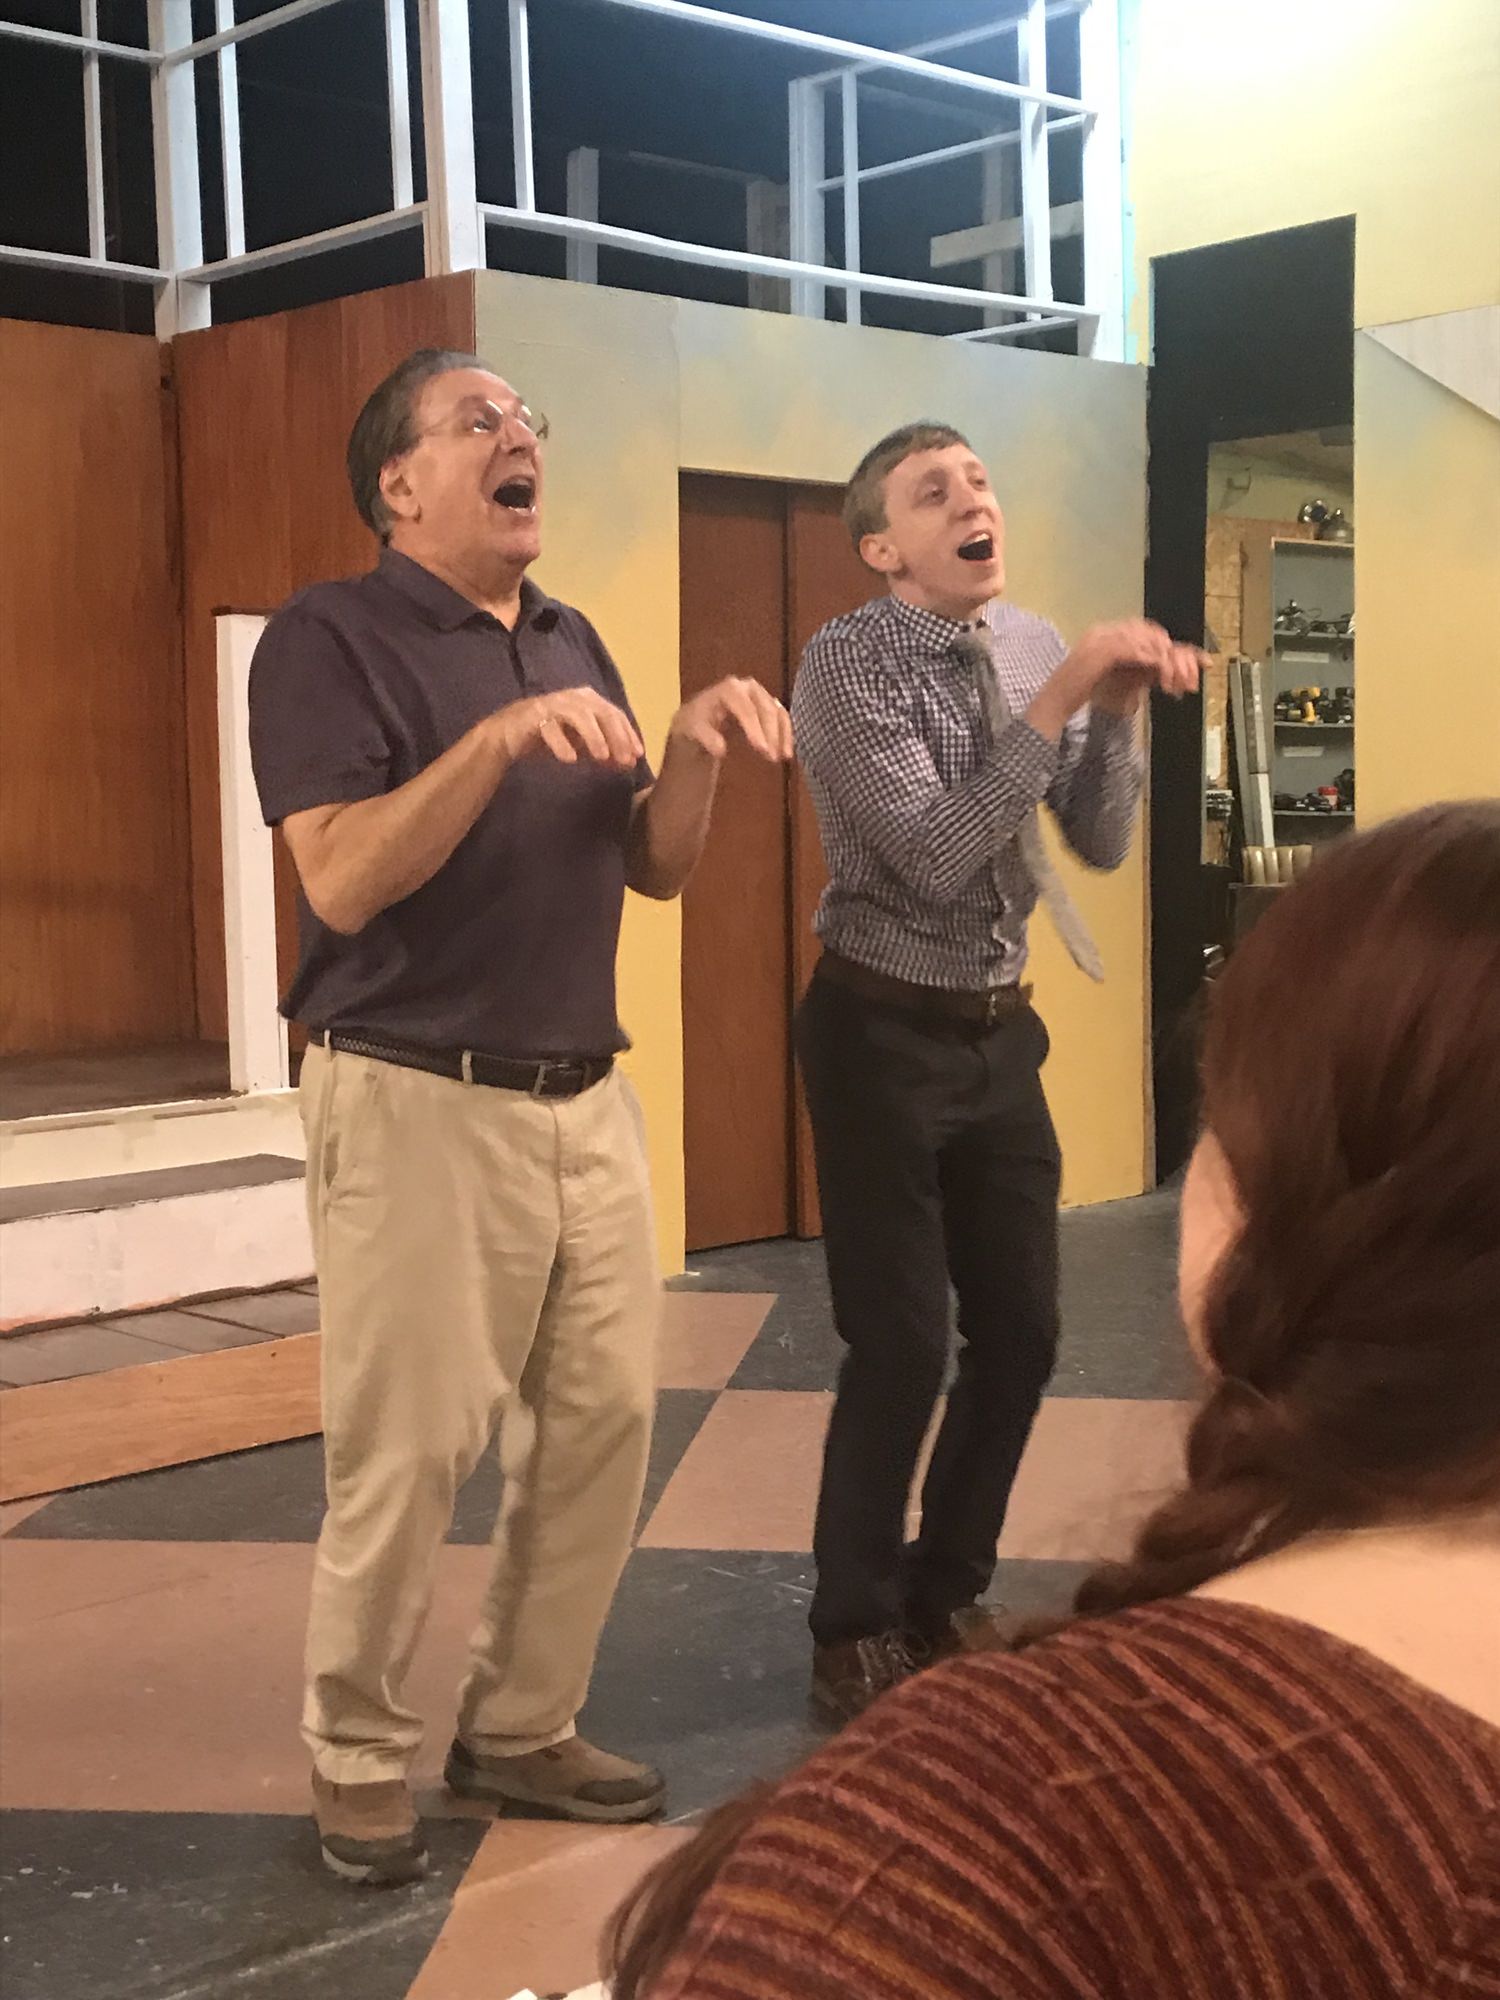 John Zinzi, of Milton, as J. B. Biggley and Steven Dow, of Rehoboth Beach as J. Pierrepont Finch ?Rip the Chipmunk? as they rehearse a scene for Possum Point Players? upcoming musical comedy HOW TO SUCCEED IN BUSINESS WITHOUT REALLY TRYING April 5 - 12, 2019. Co-Director Lorraine Steinhoff, of Milford, looks on. For more information, please go to www.possumpointplayers.org or call (302)856-4560. 